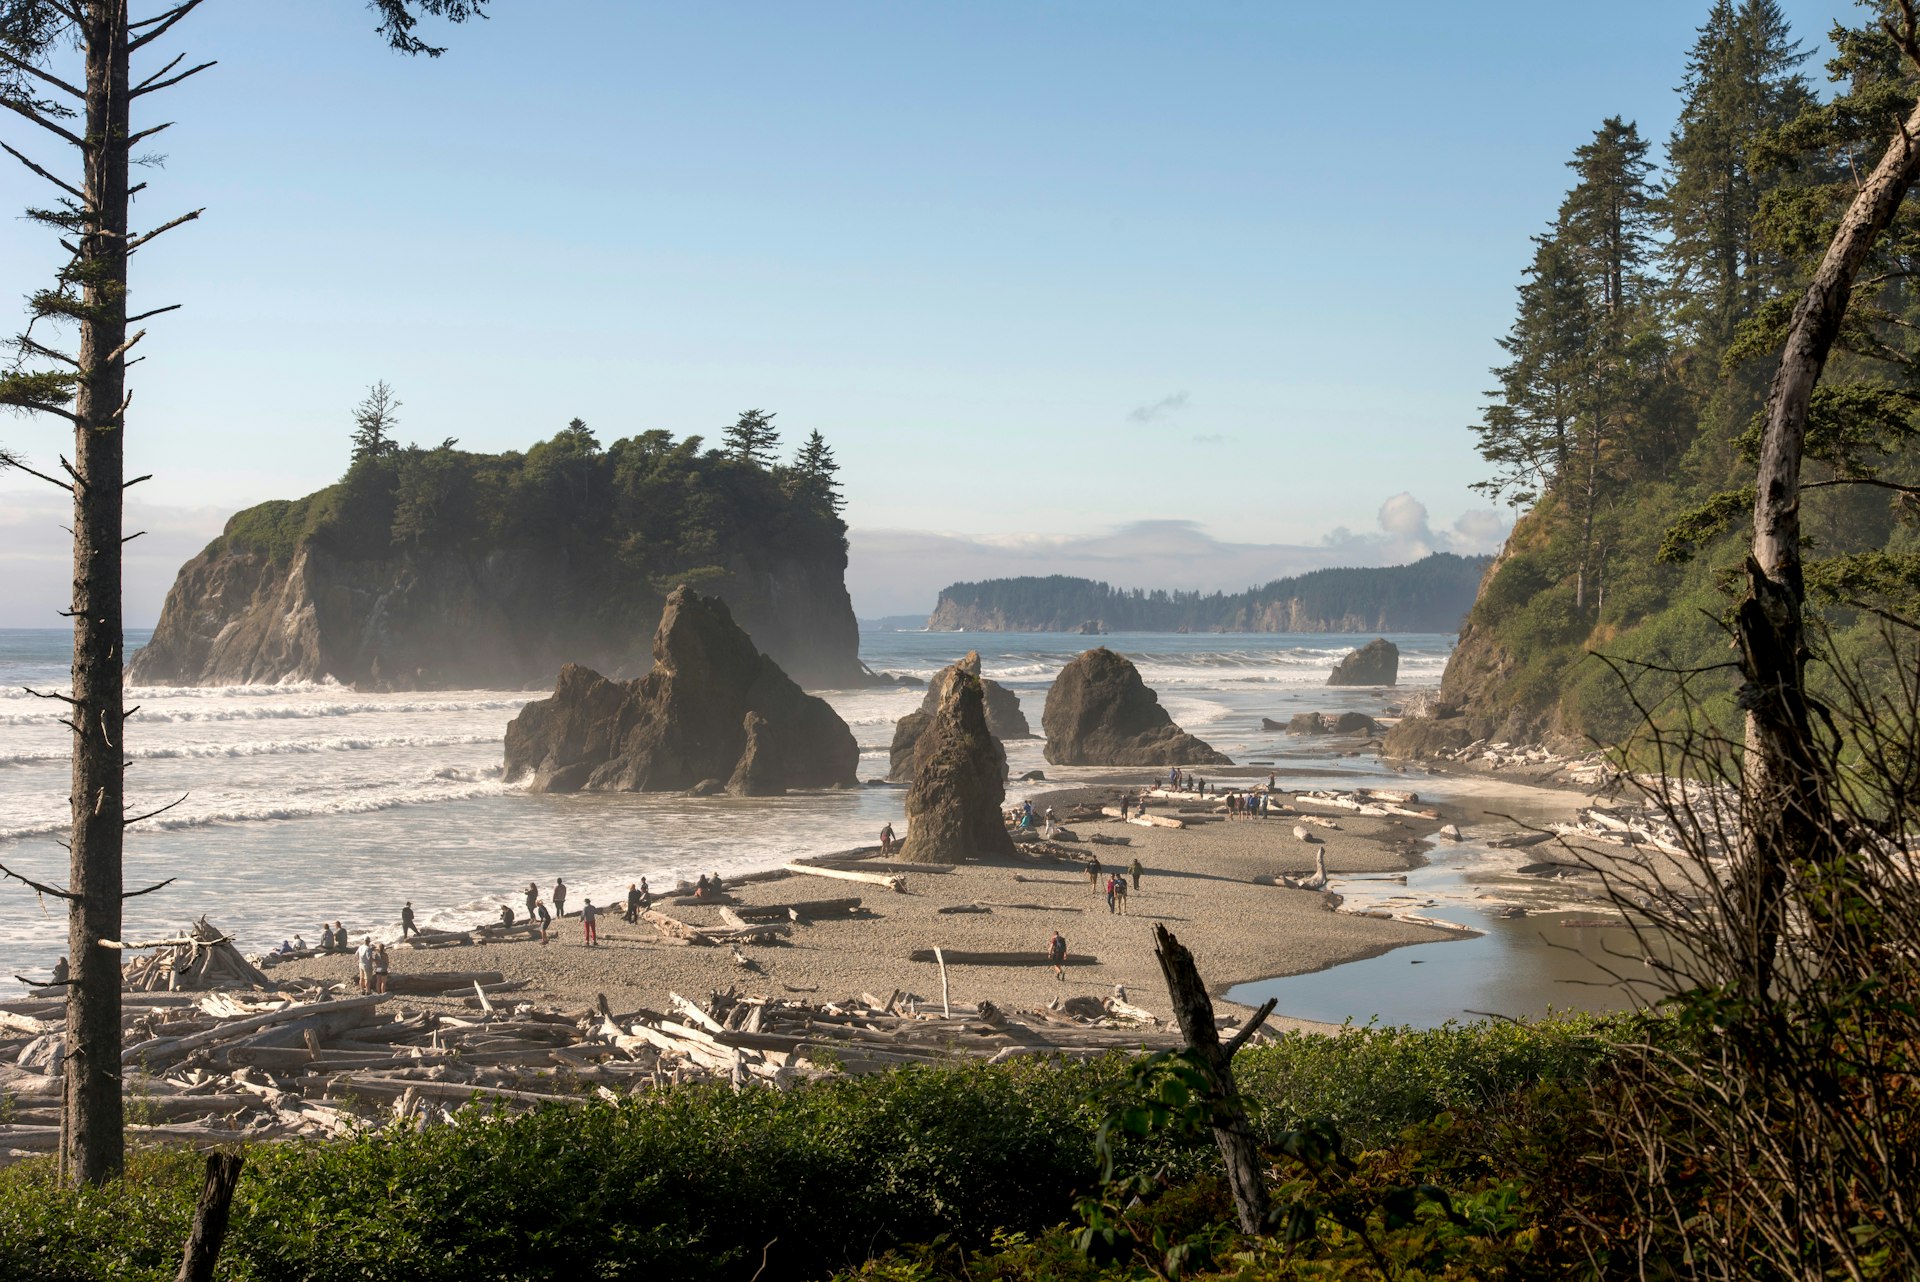 Tourists visit Ruby Beach in Olympic National Park, Washington State, USA